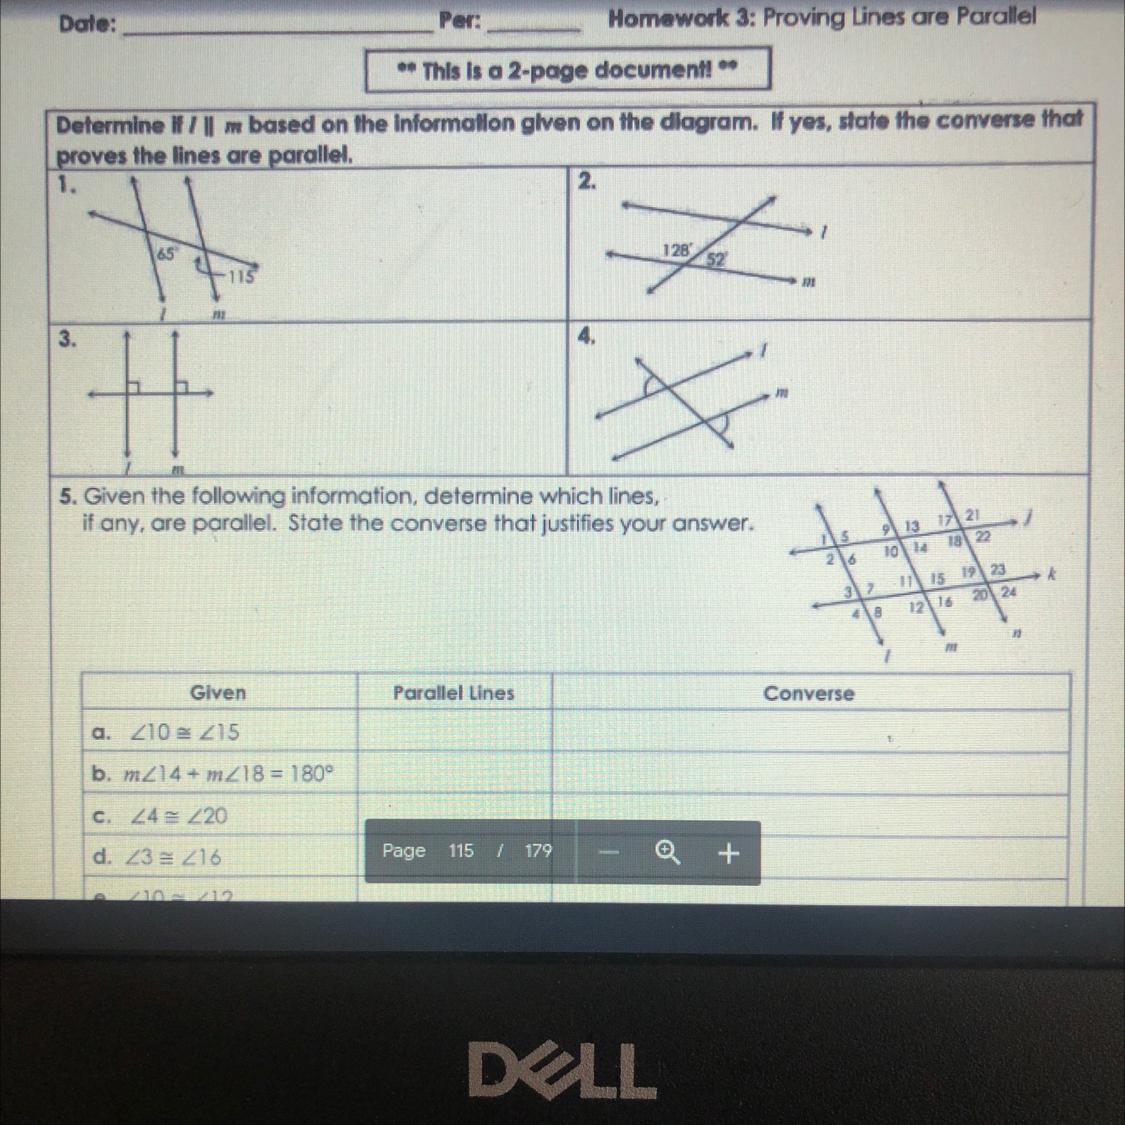 Unit 3 Homework 3 Proving Lines Are ParallelI Need Help On 1,2,3,4